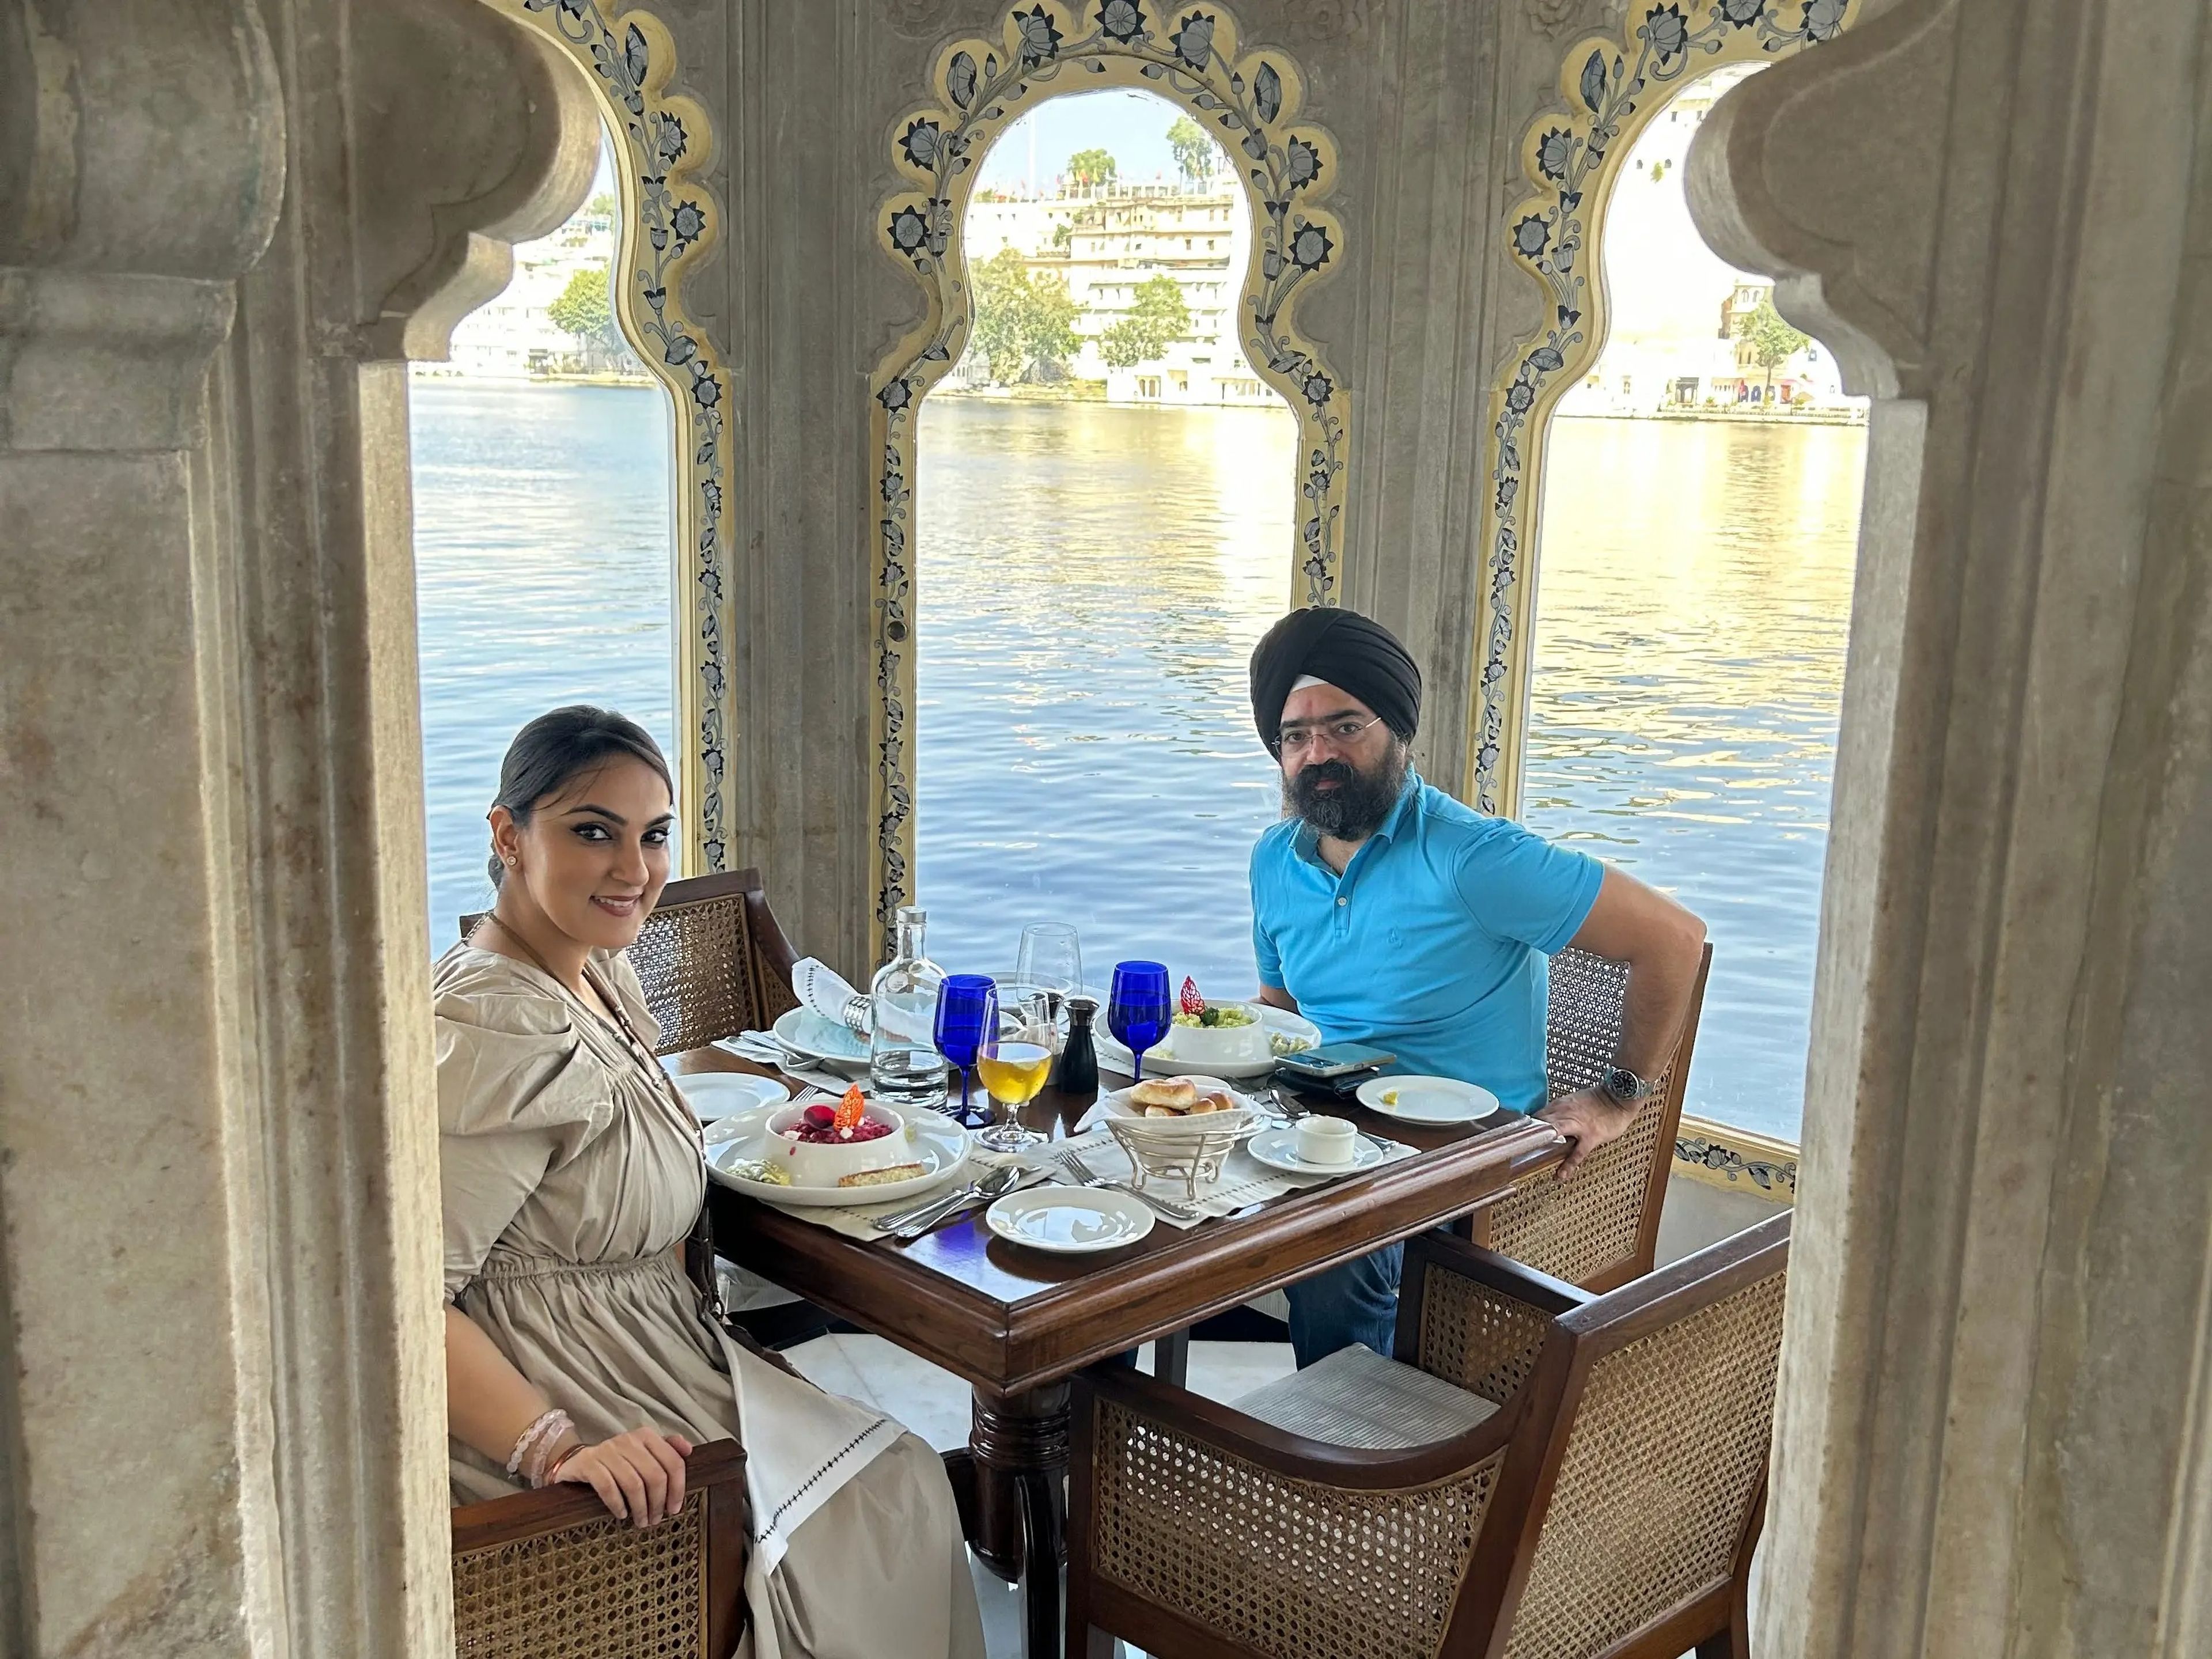 Noor and her husband eating in a private area surrounded by columns next to the lake.